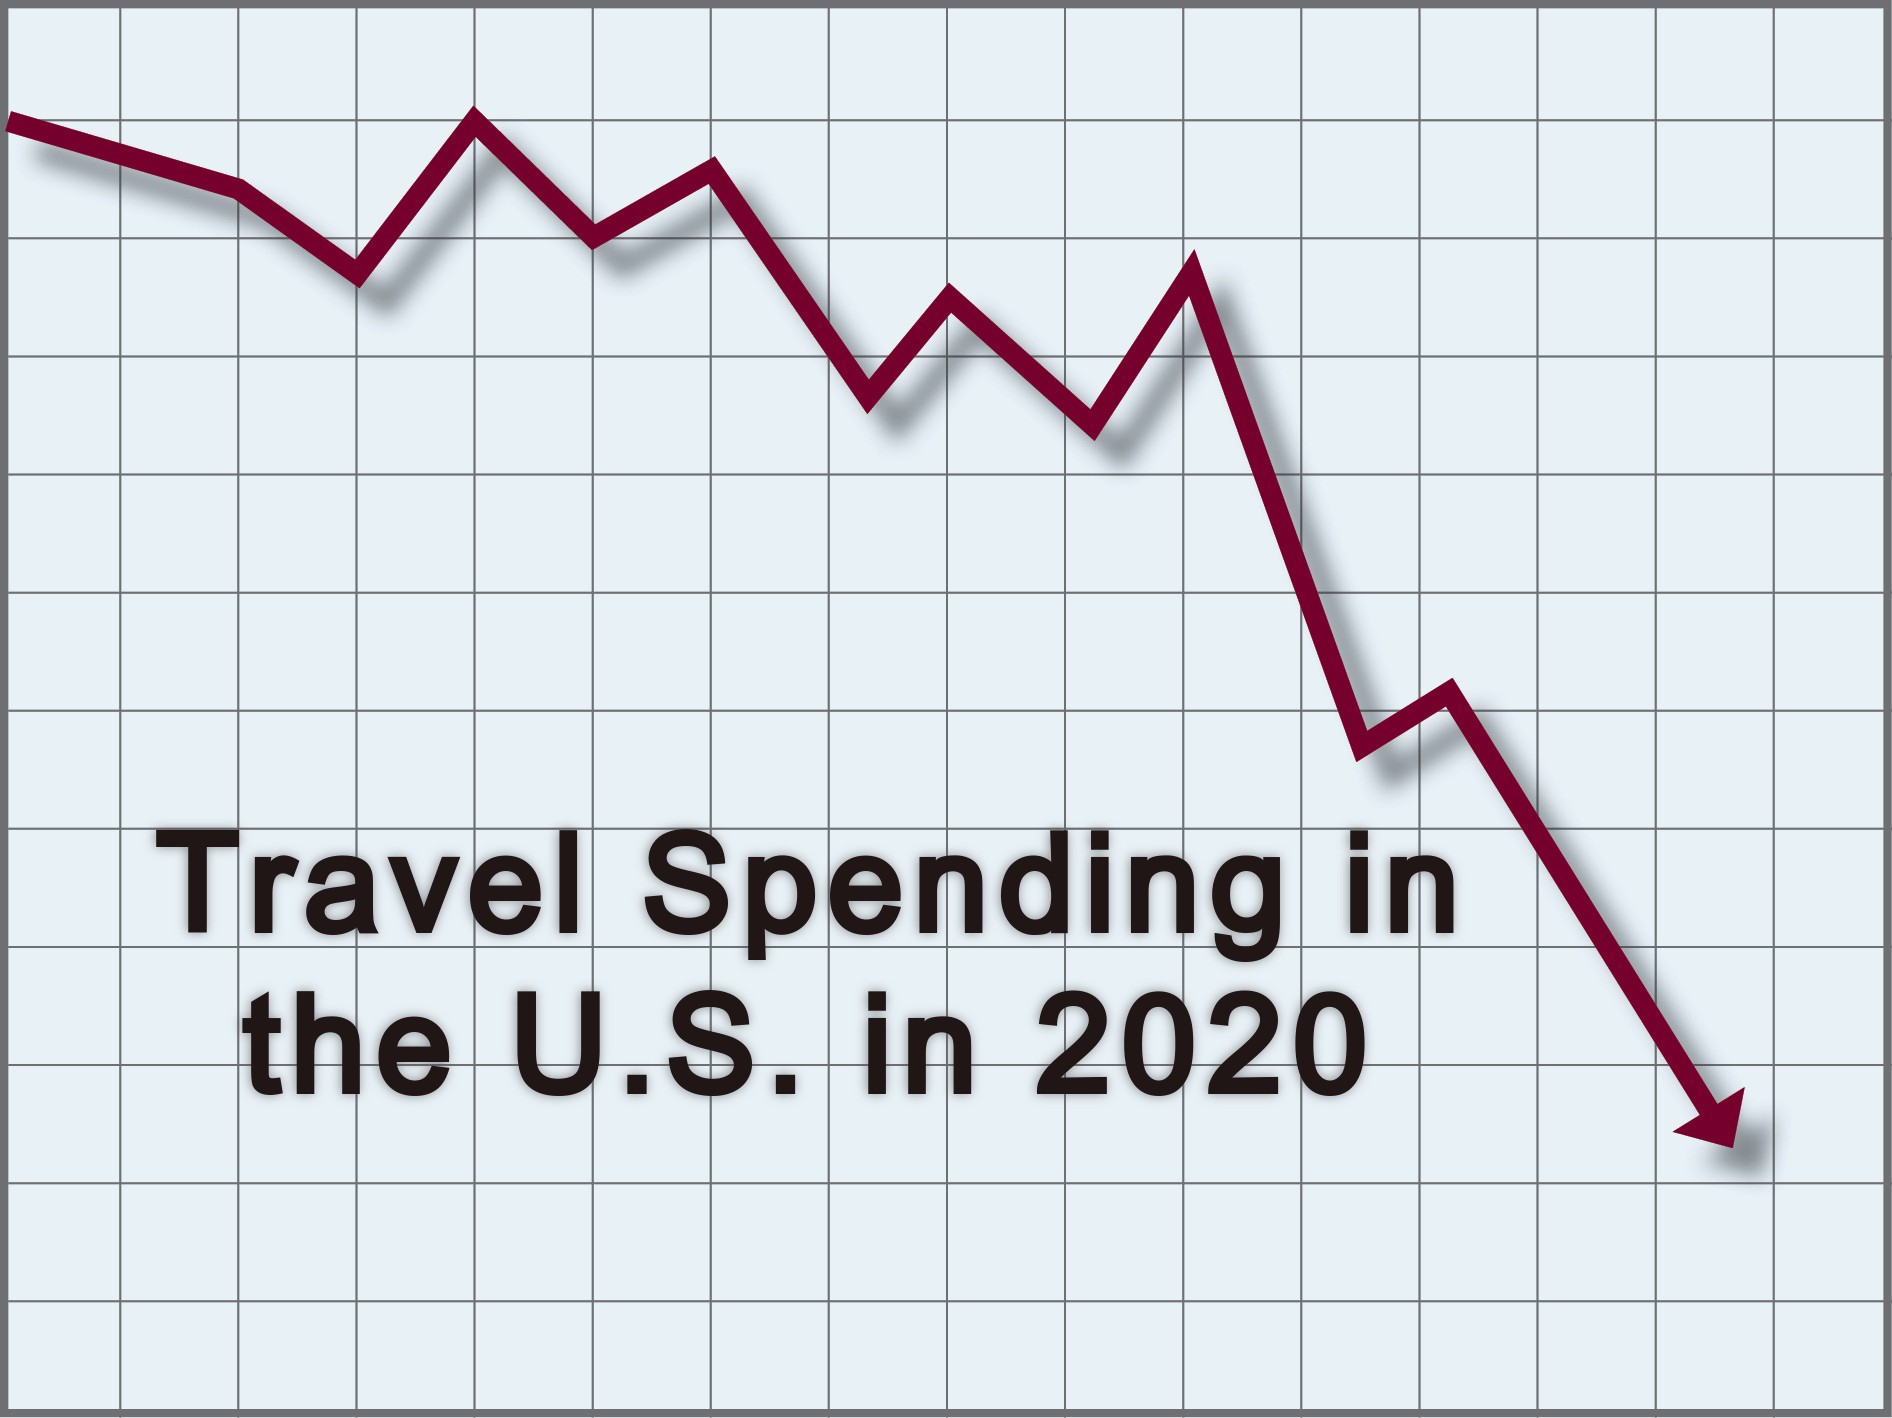 Travel Spending in U.S. to Plunge by Nearly Half in 2020